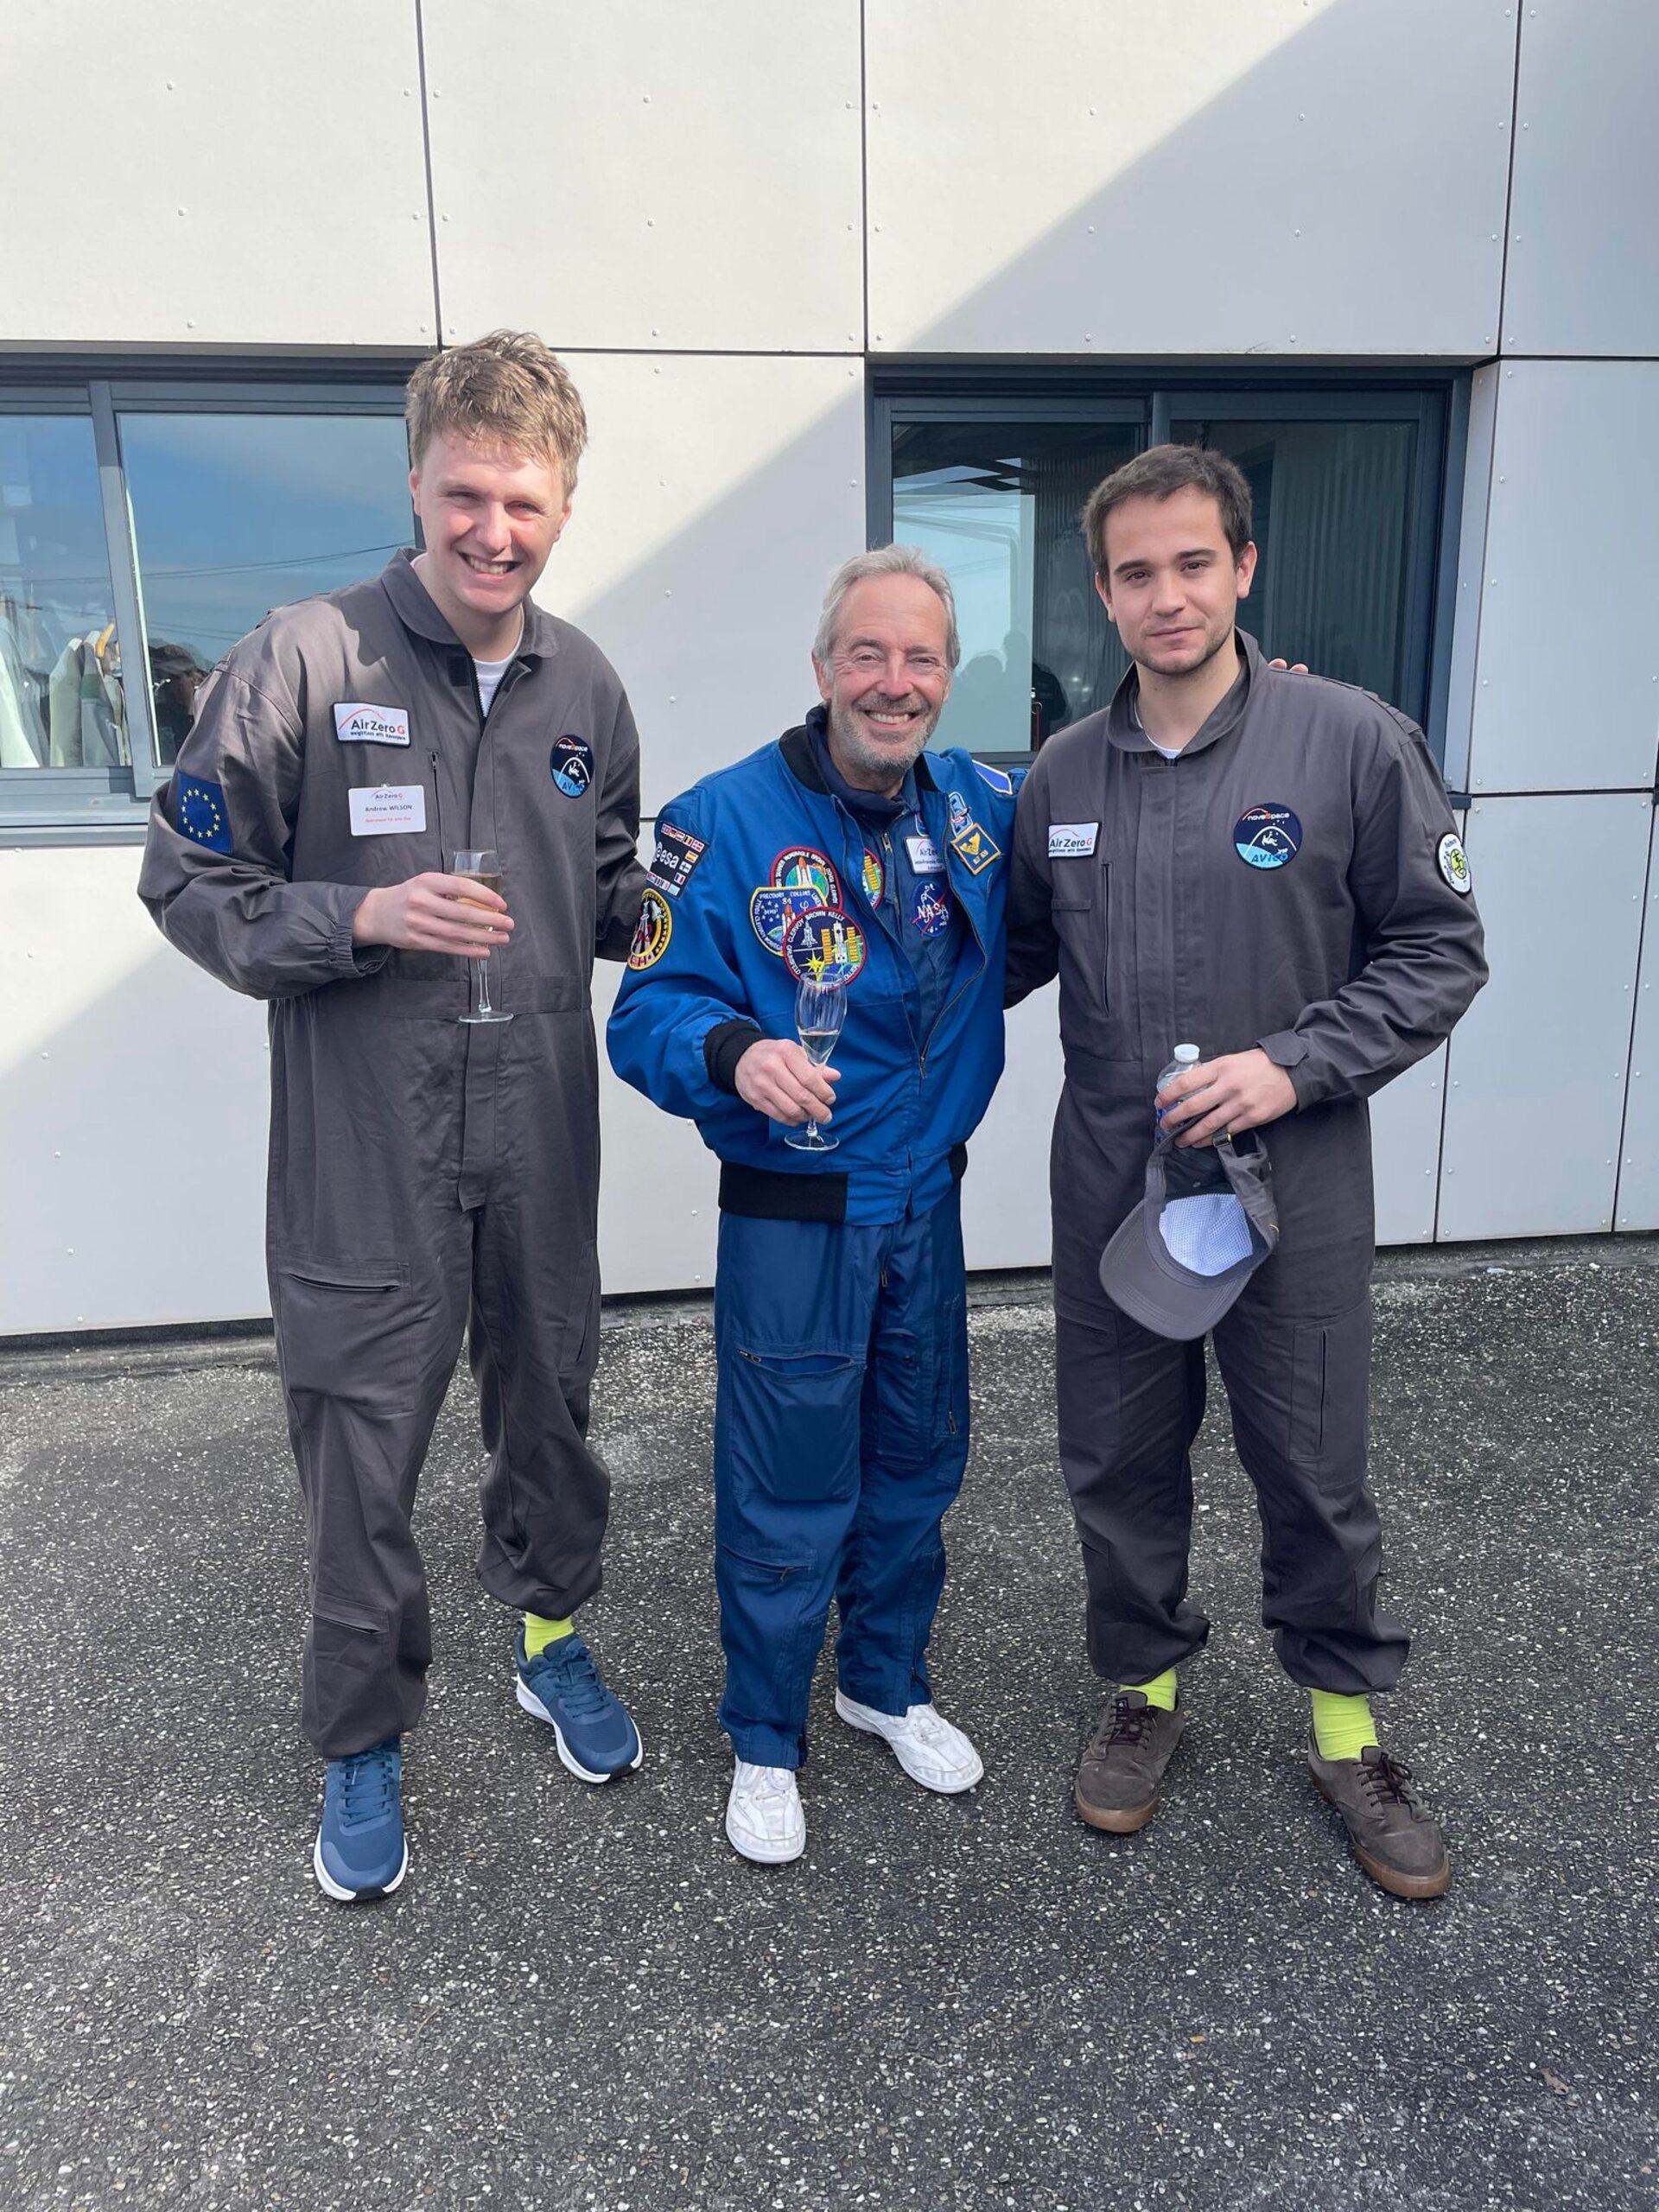 Andrew Wilson (winner 2021), Jean-François Clervoy (Chair of the Jury) and Mikel Iturbe (winner 2022) before the parabolic flight